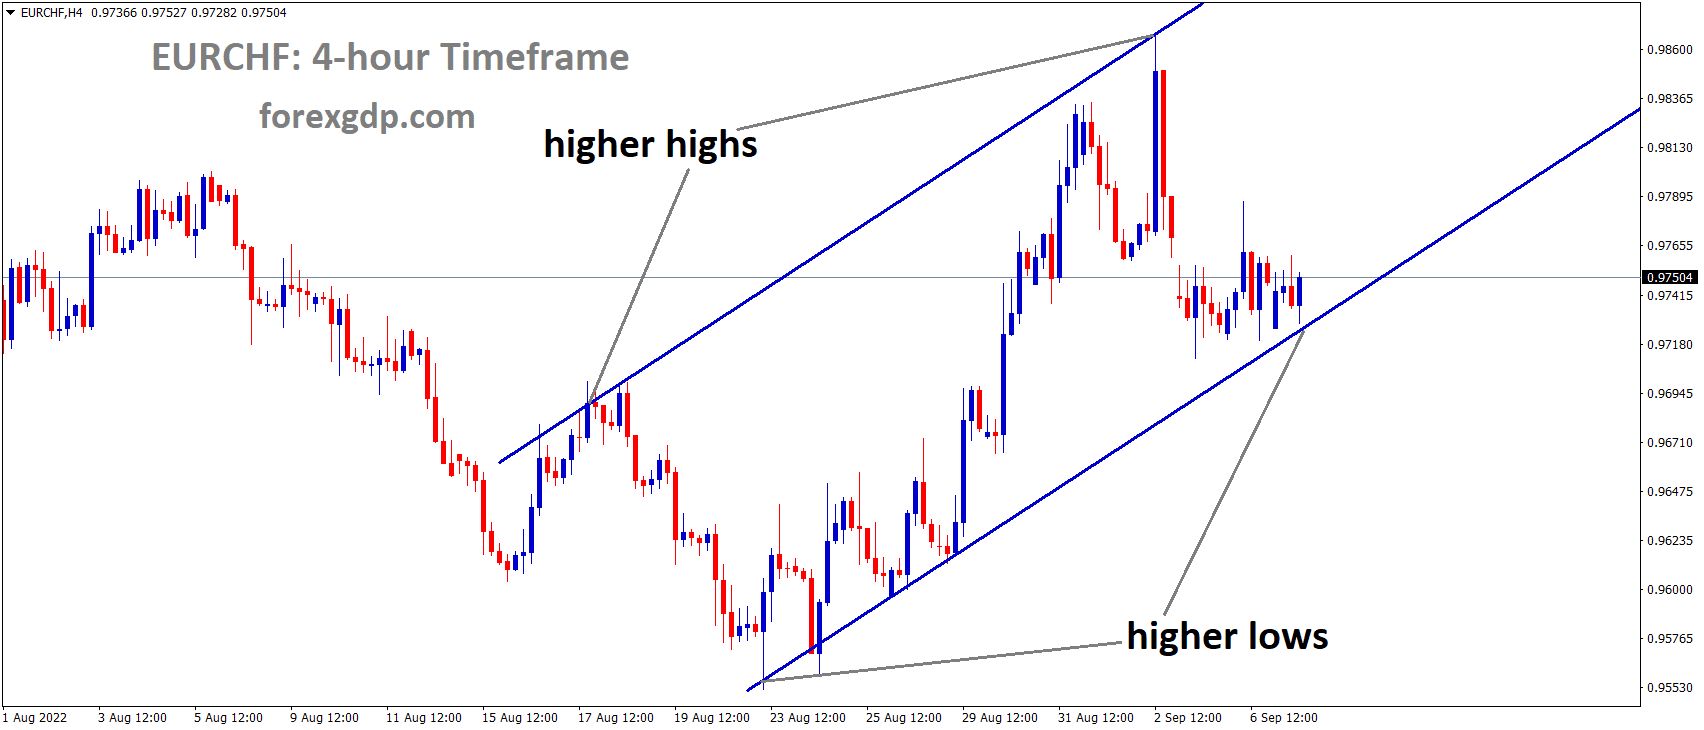 EURCHF is moving in an Ascending channel and the market has rebounded from the higher low area of the channel 1